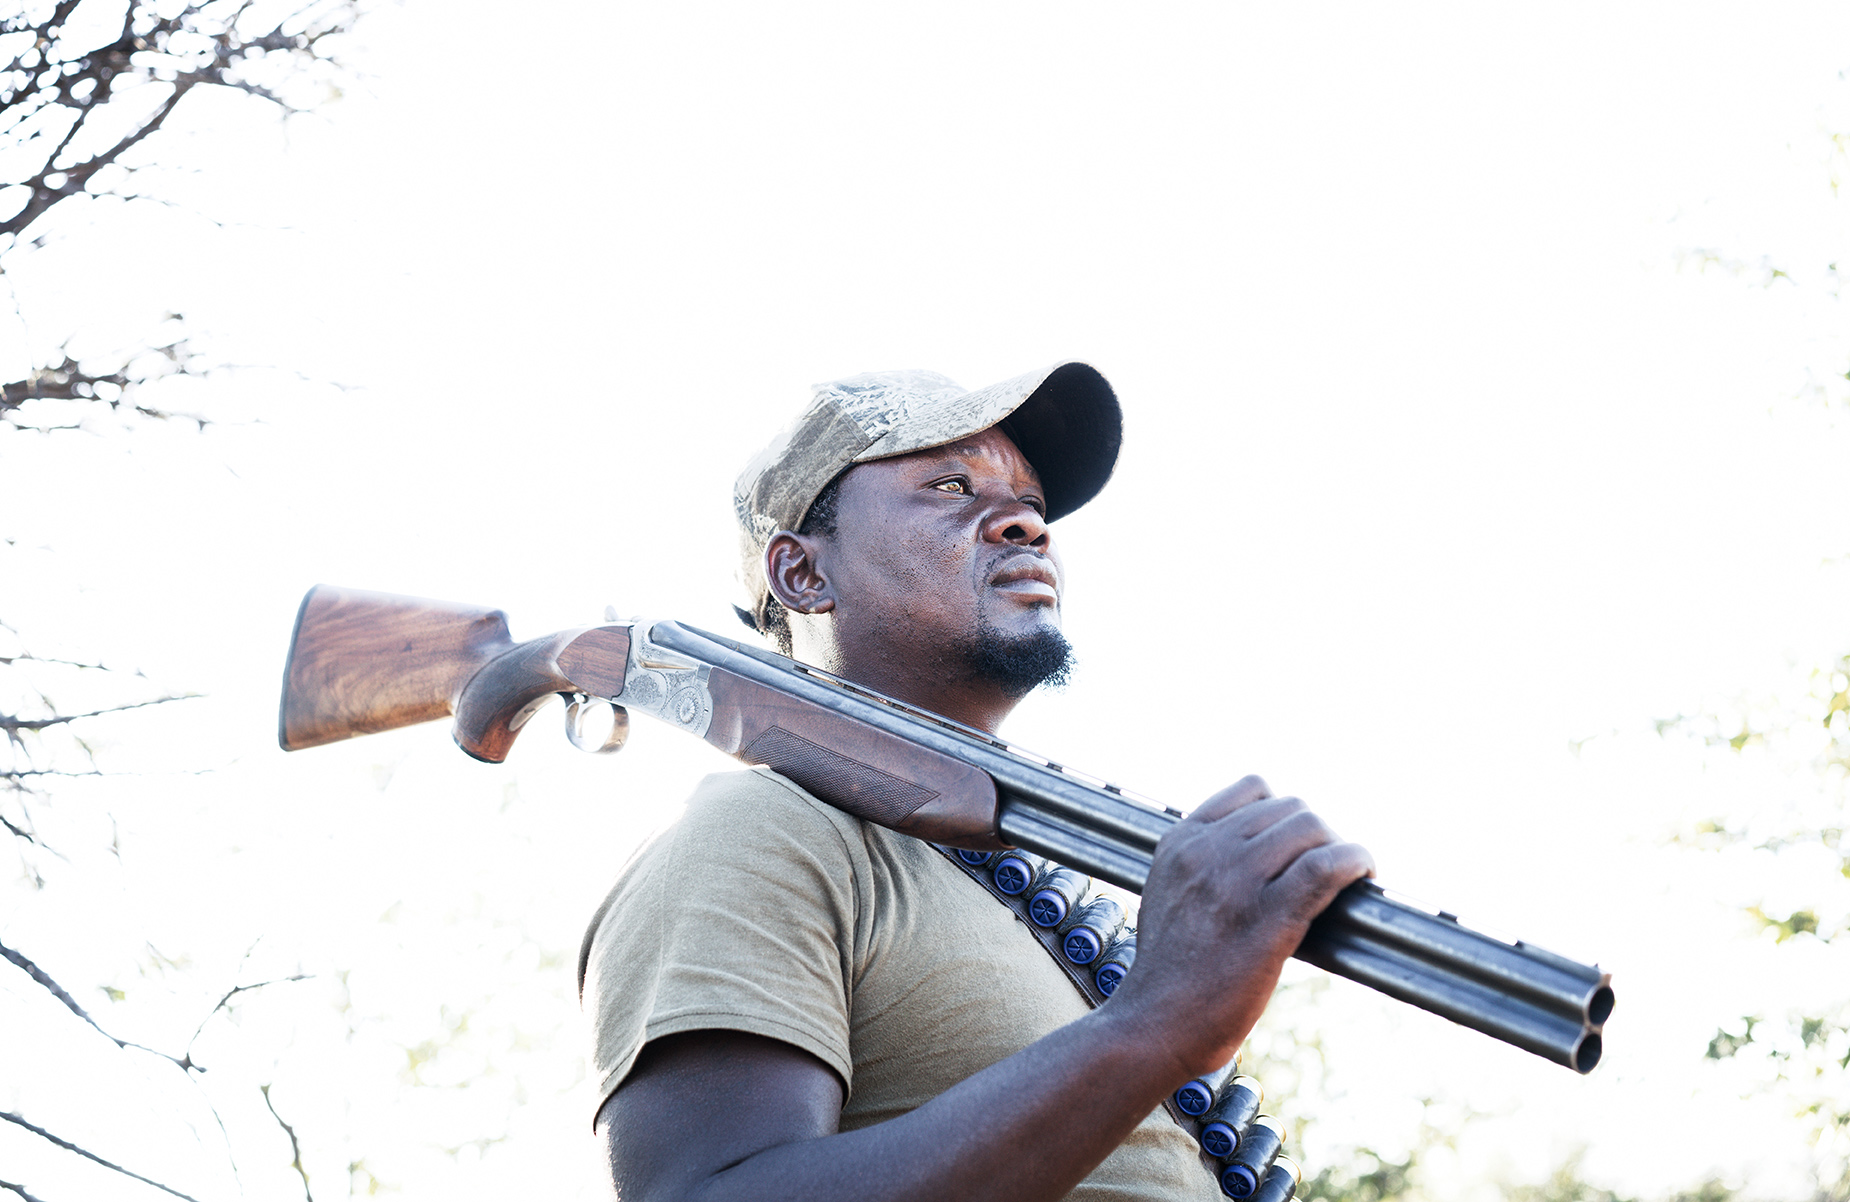 Hunting guide holding a shotgun in Namibia, Africa